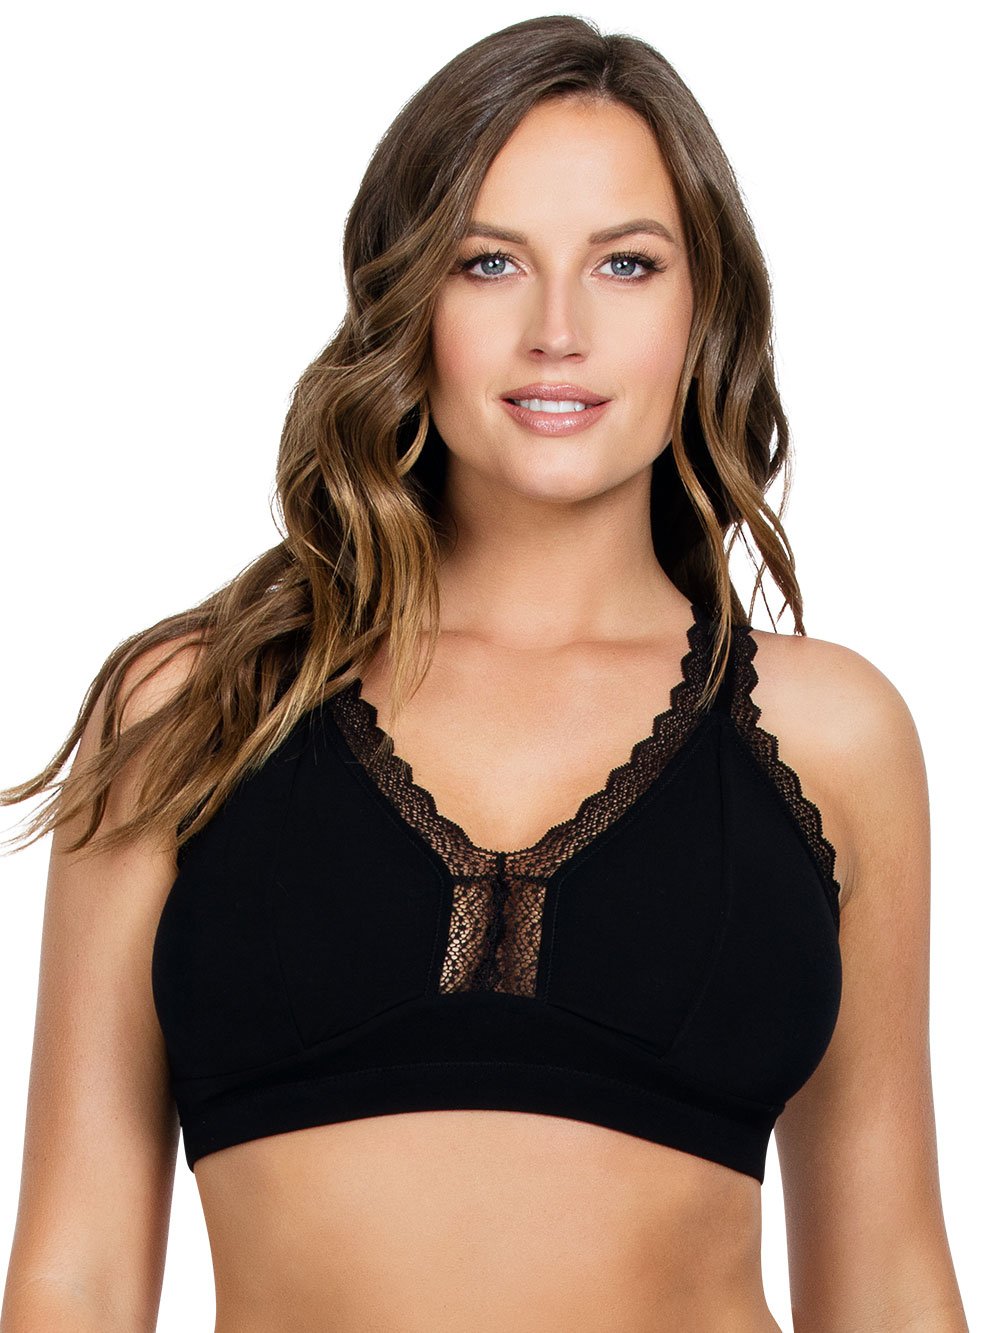 Plus Size Bras, Sexy Bras for Plus Size, Bigger & Full Figure Bras Tagged  Bras - HauteFlair